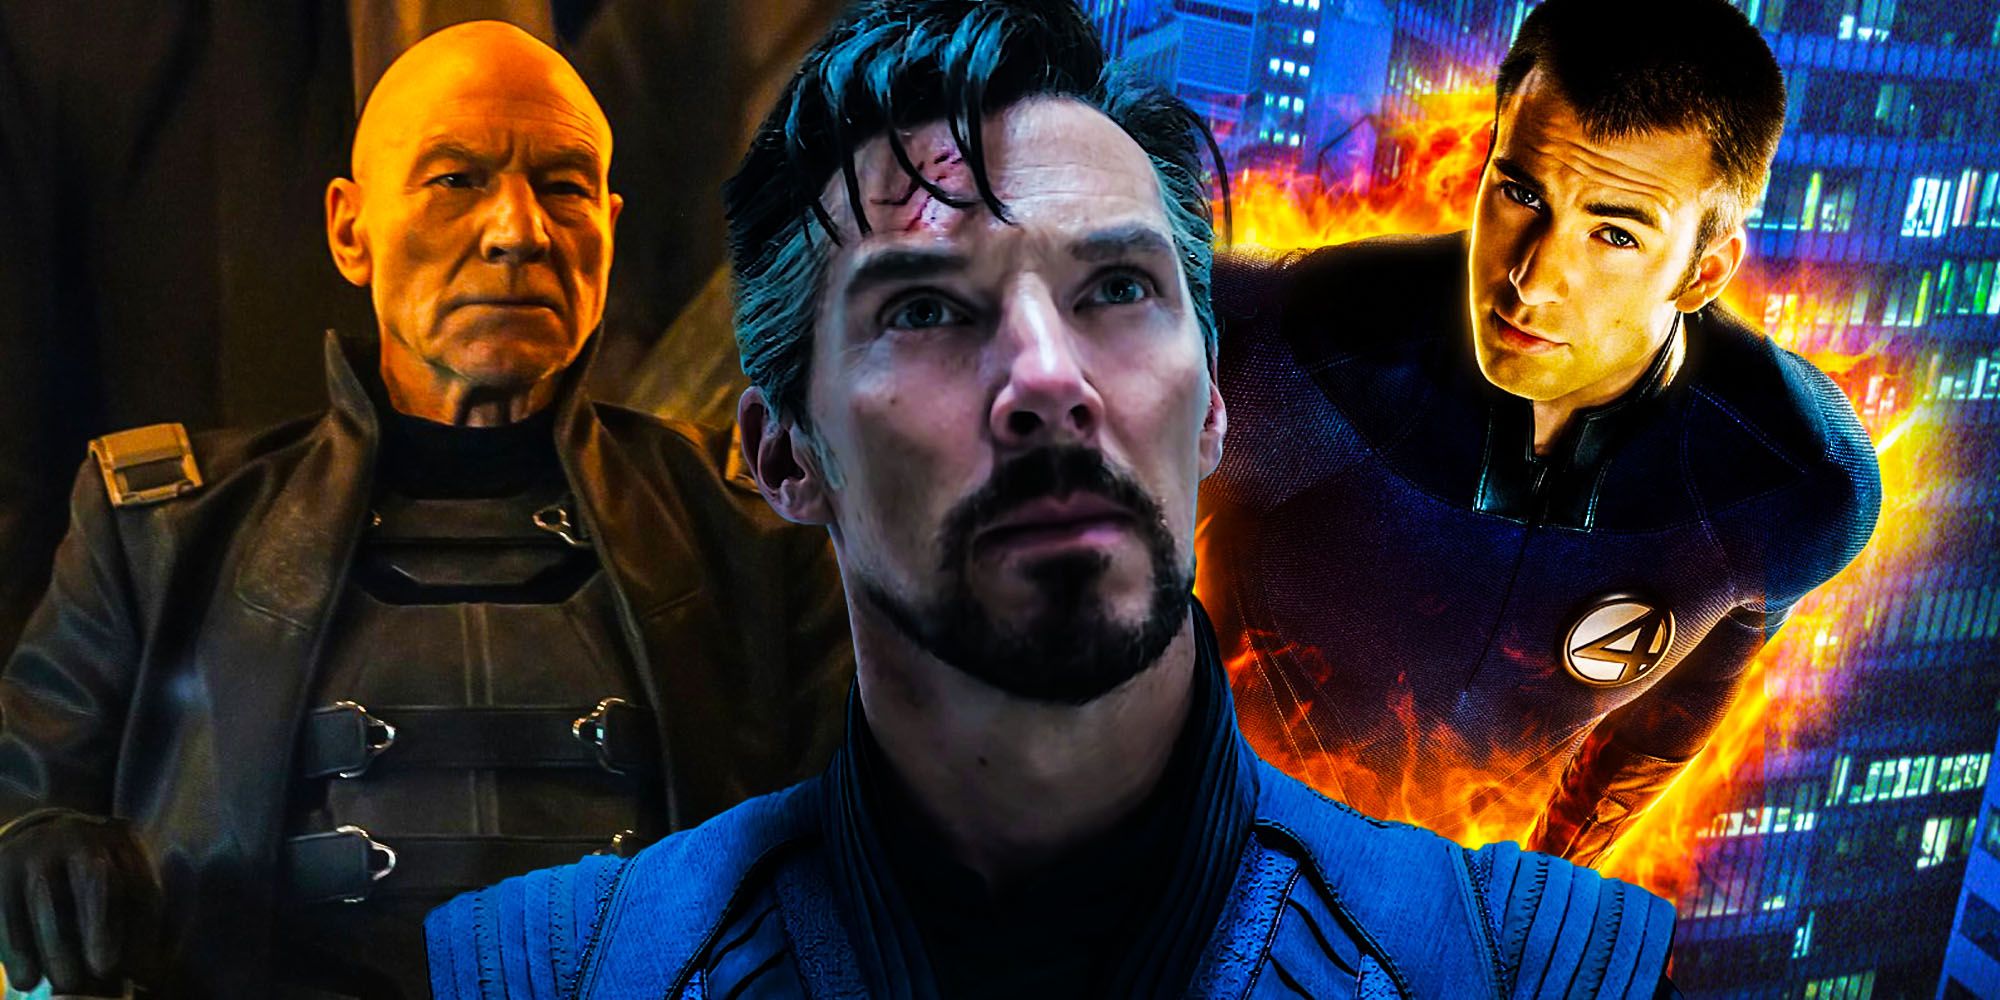 Doctor Strange In The Multiverse Of Madness To Be The Next 'Avengers' Owing  To The 'Endgame' Like Surprises?